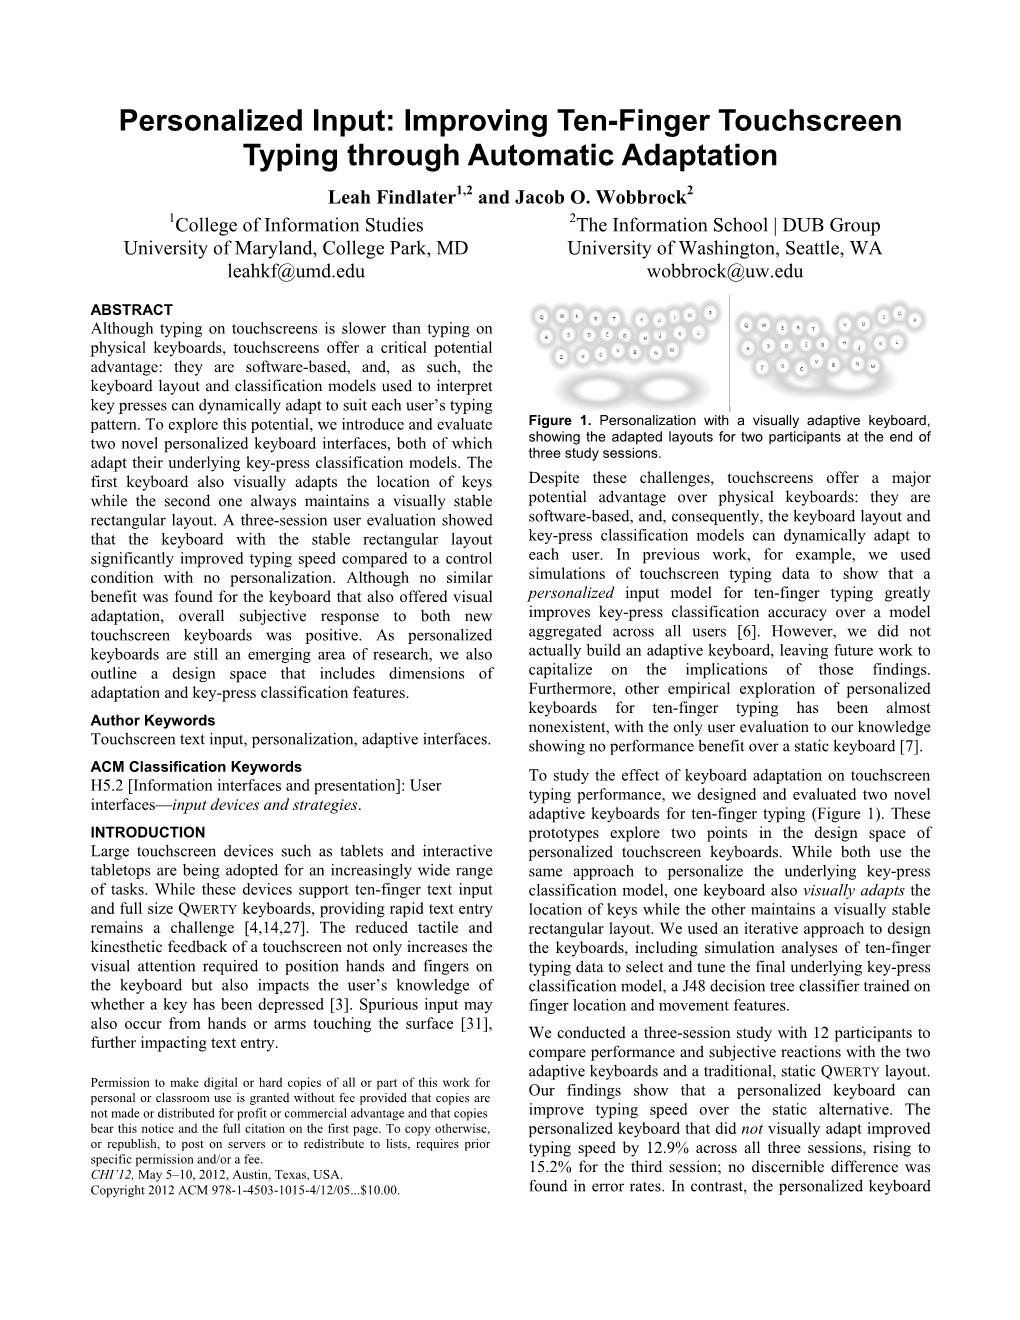 Personalized Input: Improving Ten-Finger Touchscreen Typing Through Automatic Adaptation Leah Findlater1,2 and Jacob O